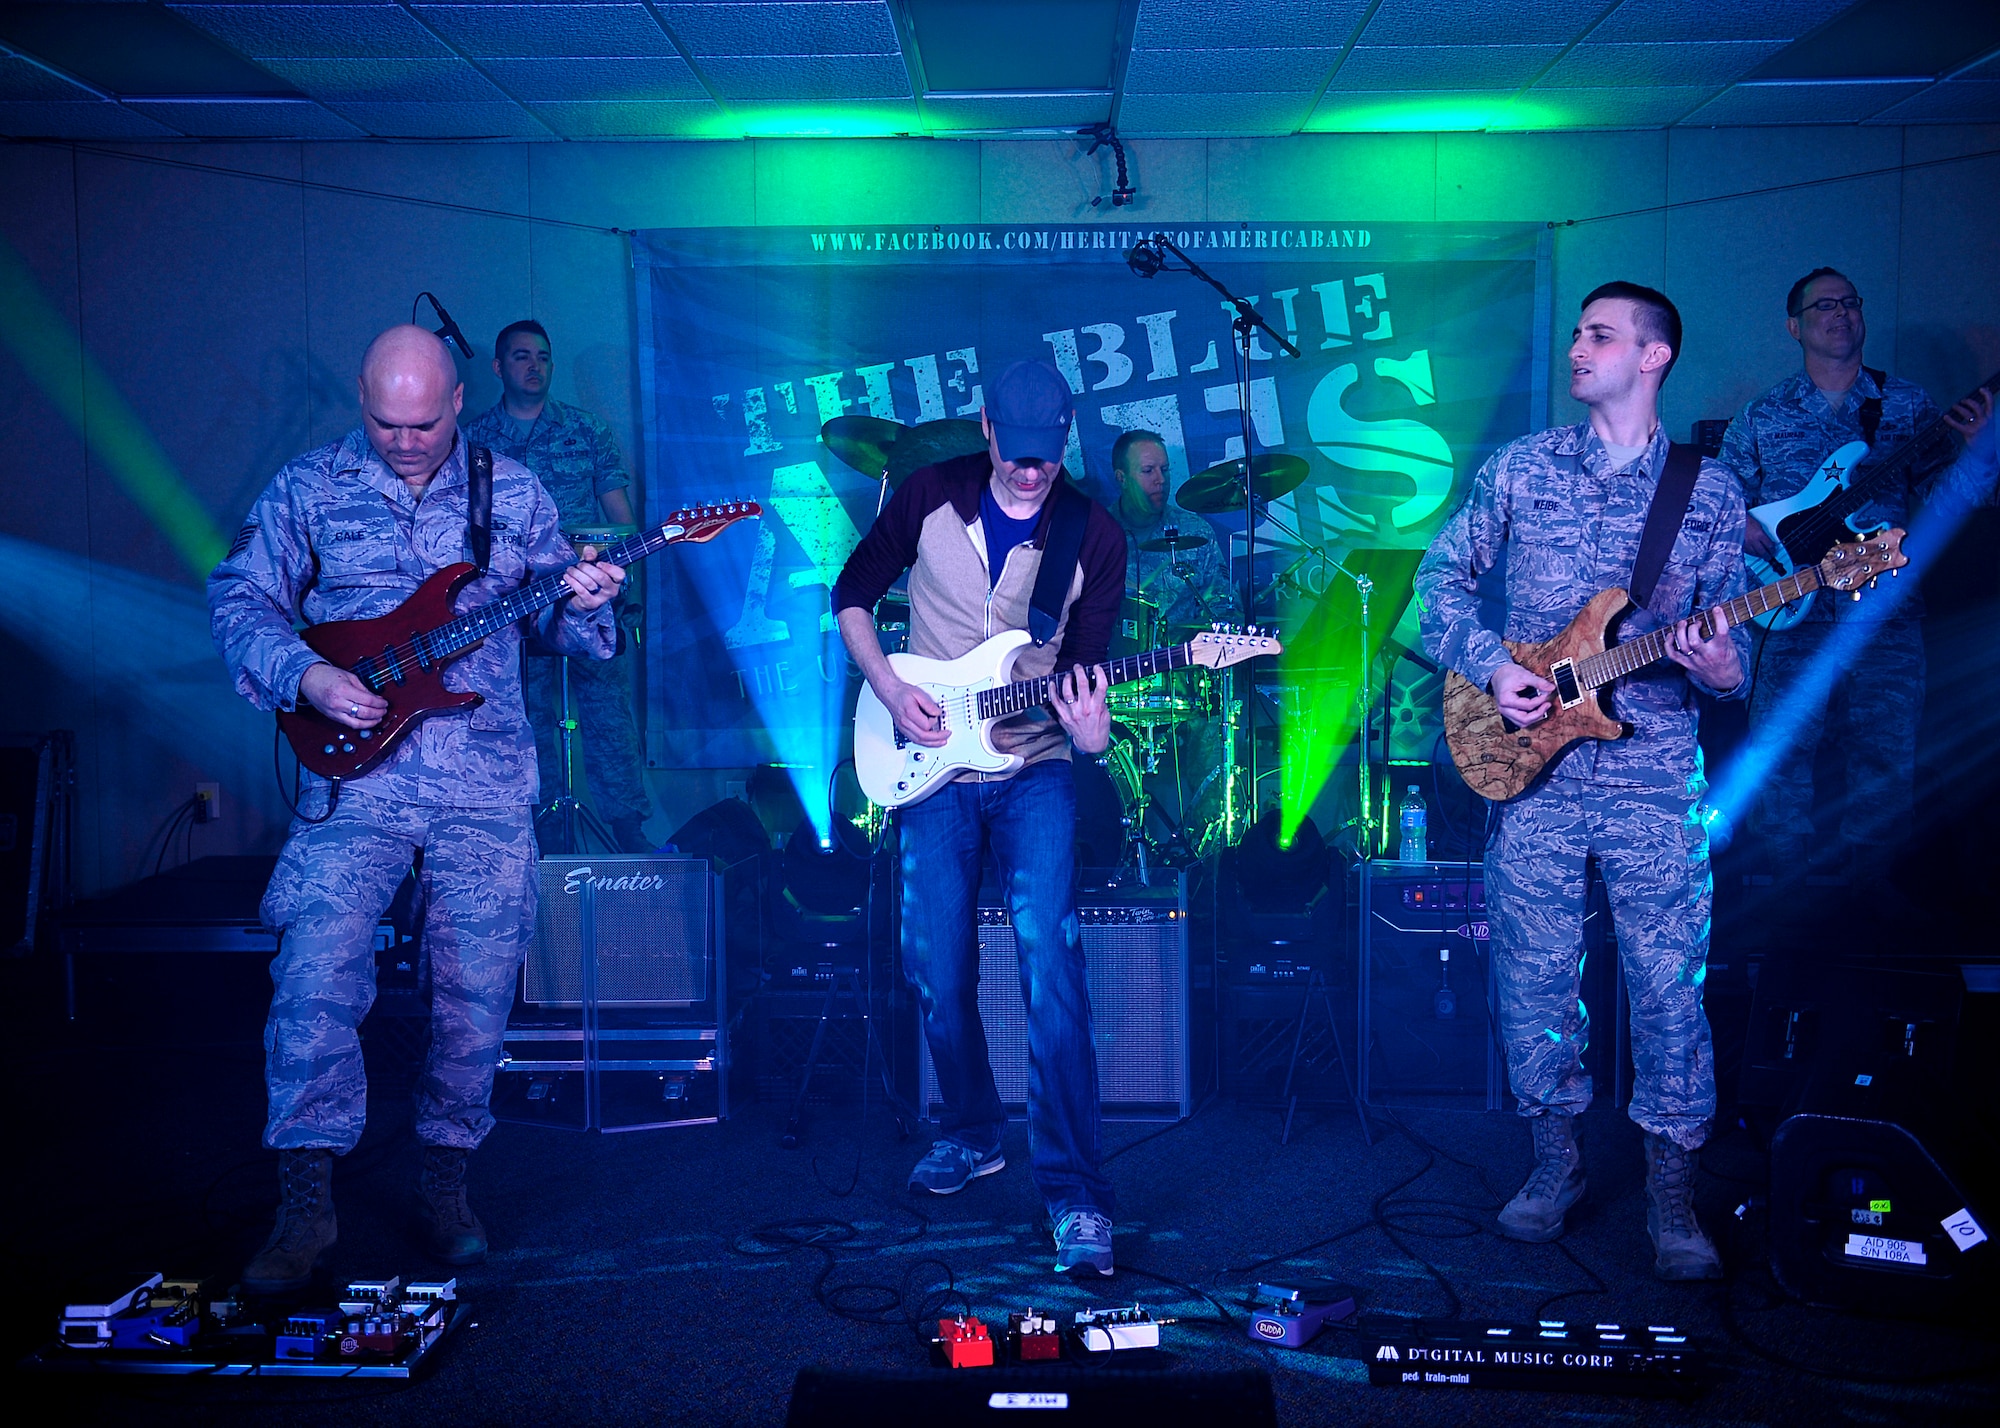 The Blue Aces, a component of the U.S. Air Force Heritage of America Band, perform with Jake Cinninger, Umphrey’s McGee’s lead guitarist, during a musical performance at Langley Air Force Base, Va., Feb. 12, 2015. Cinninger, an American musician, has been playing musical instruments since he was 3 years old. (U.S. Air Force photo by Airman 1st Class Breonna Veal/Released)